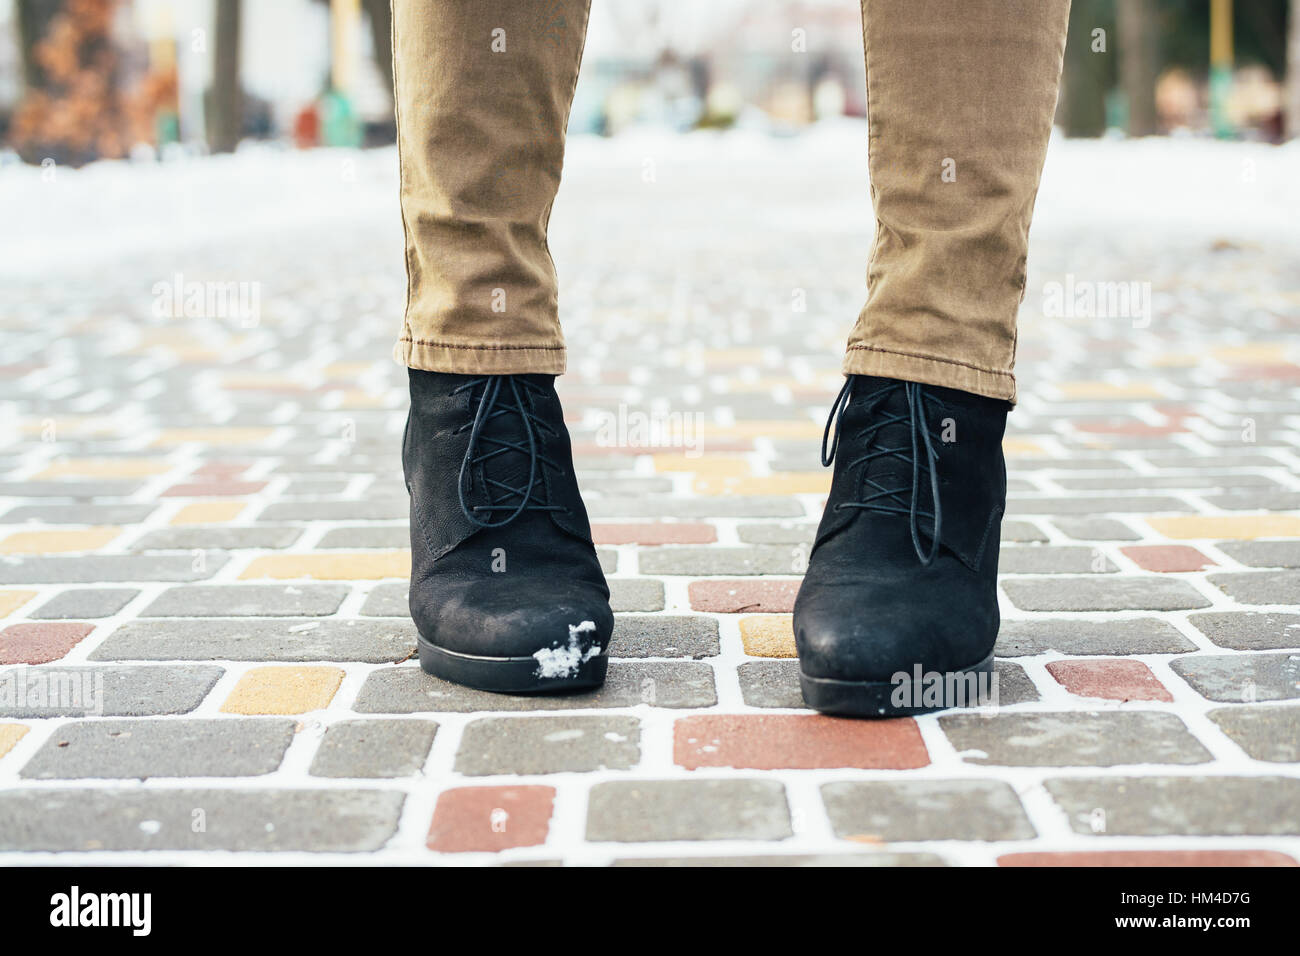 Female feet in brown jeans and black winter boots standing on a snowy  sidewalk closeup Stock Photo - Alamy